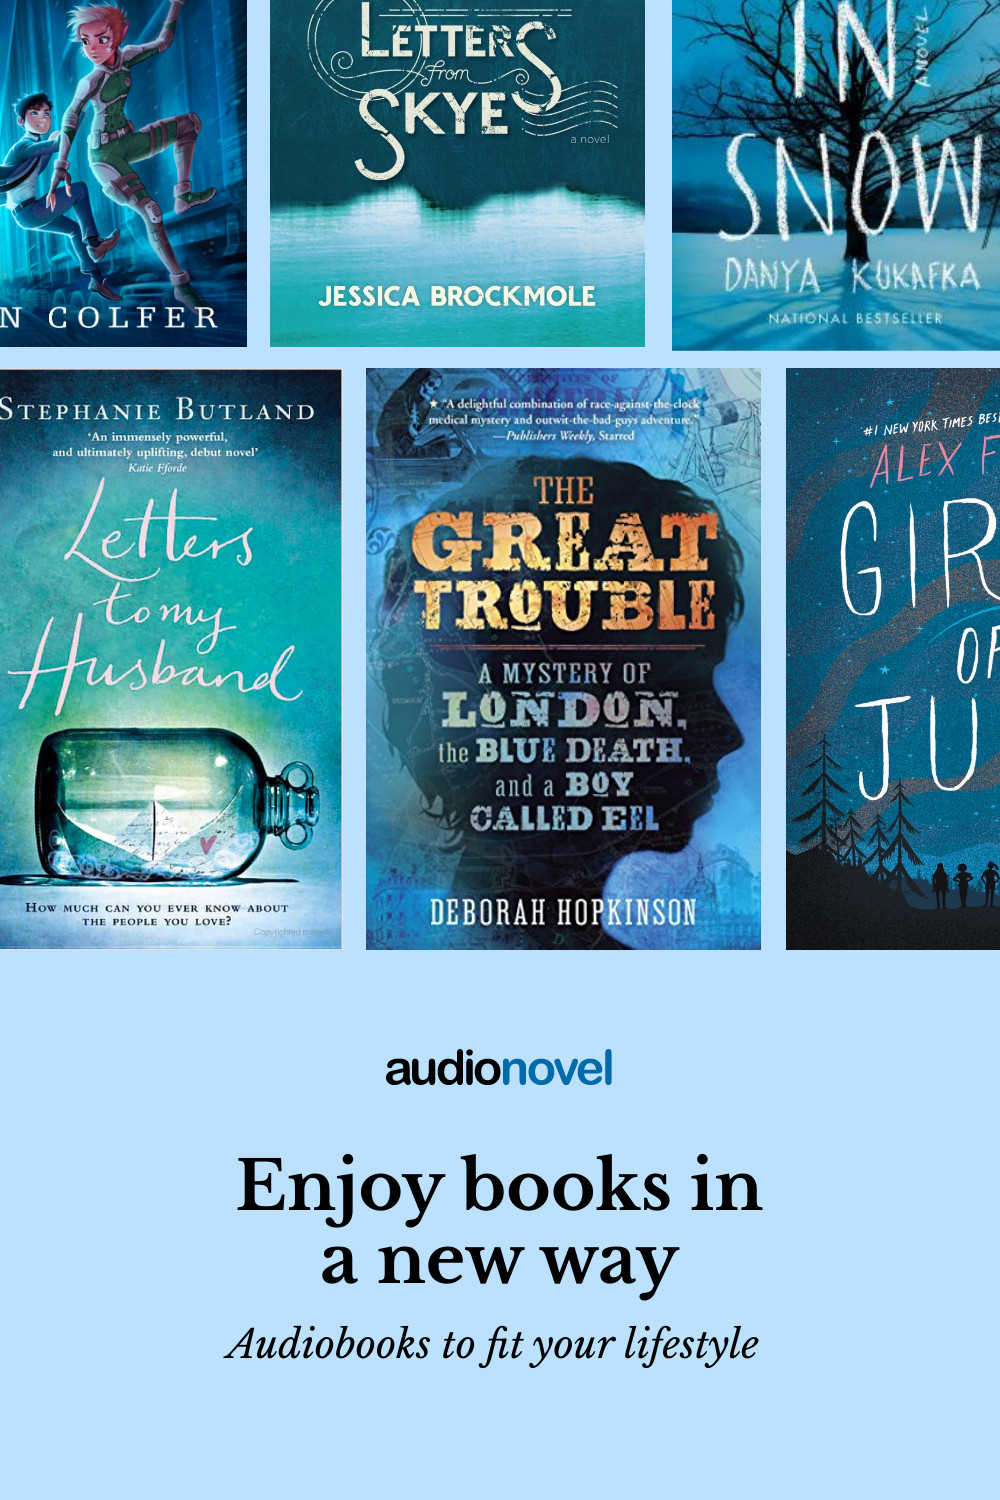 Audiobooks Lifestyle In a New Way